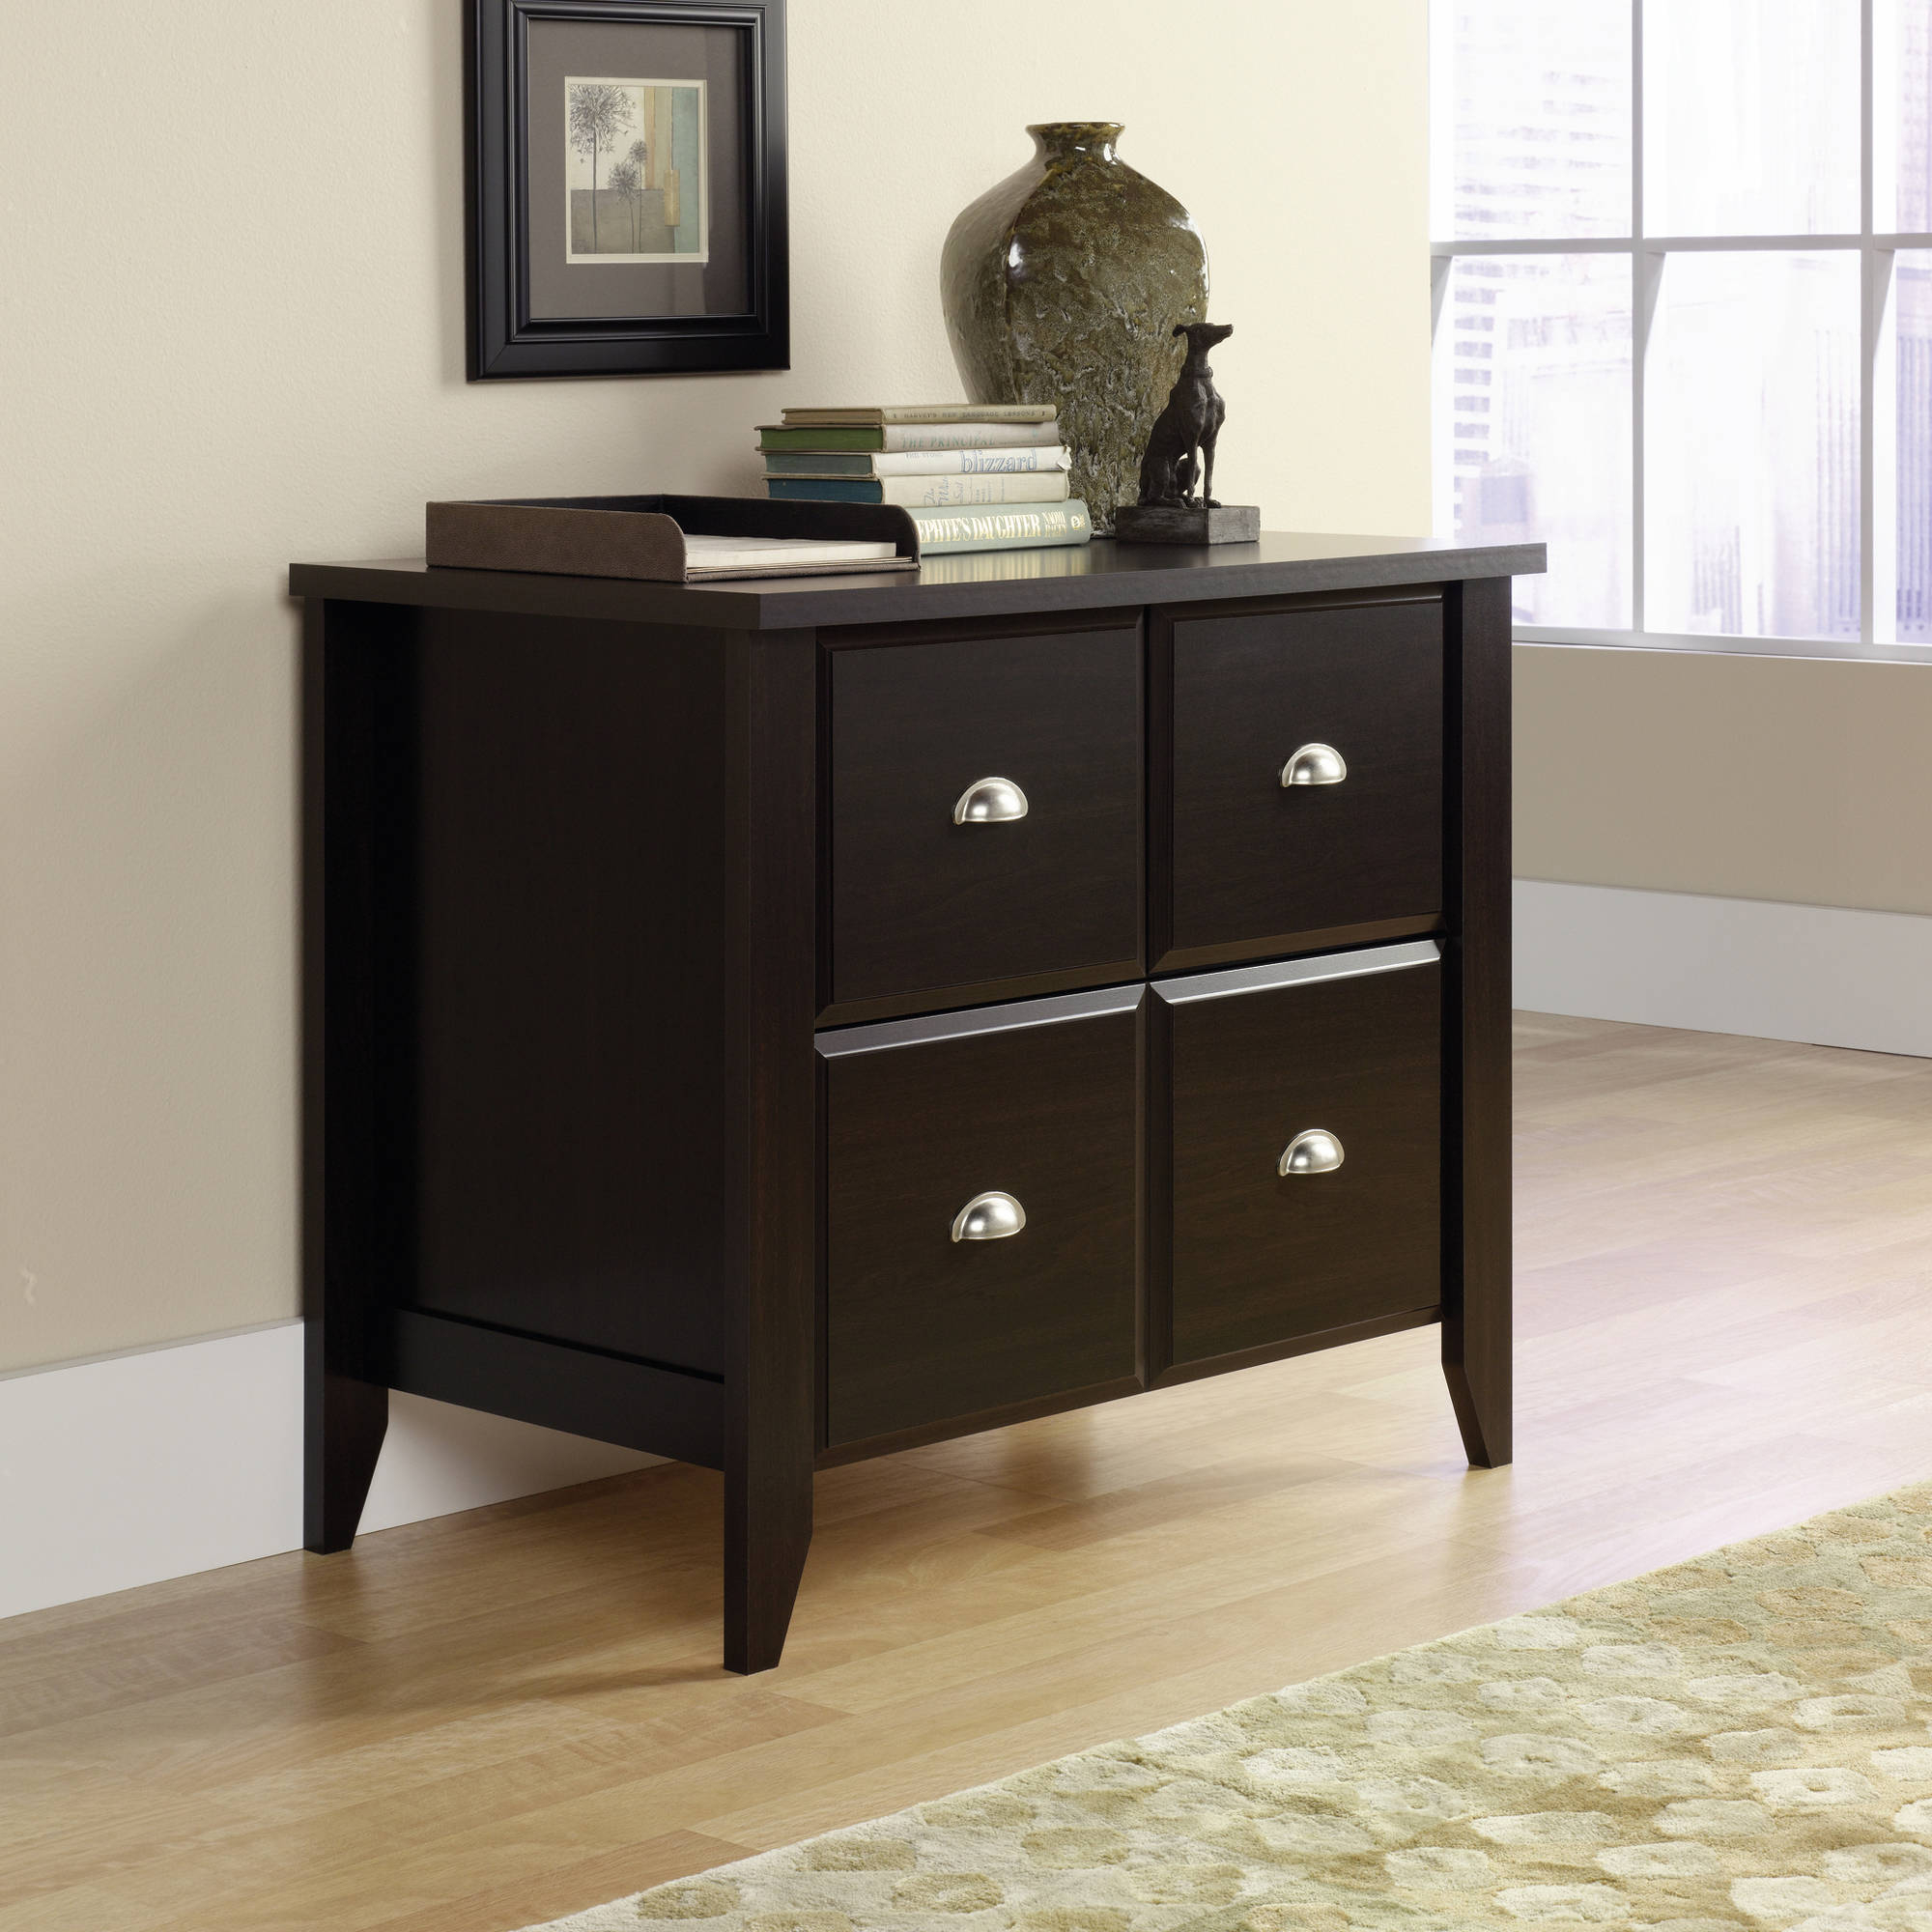 Sauder Via 2 Drawer File Cabinet In Classic Cherry Walmart throughout measurements 2000 X 2000